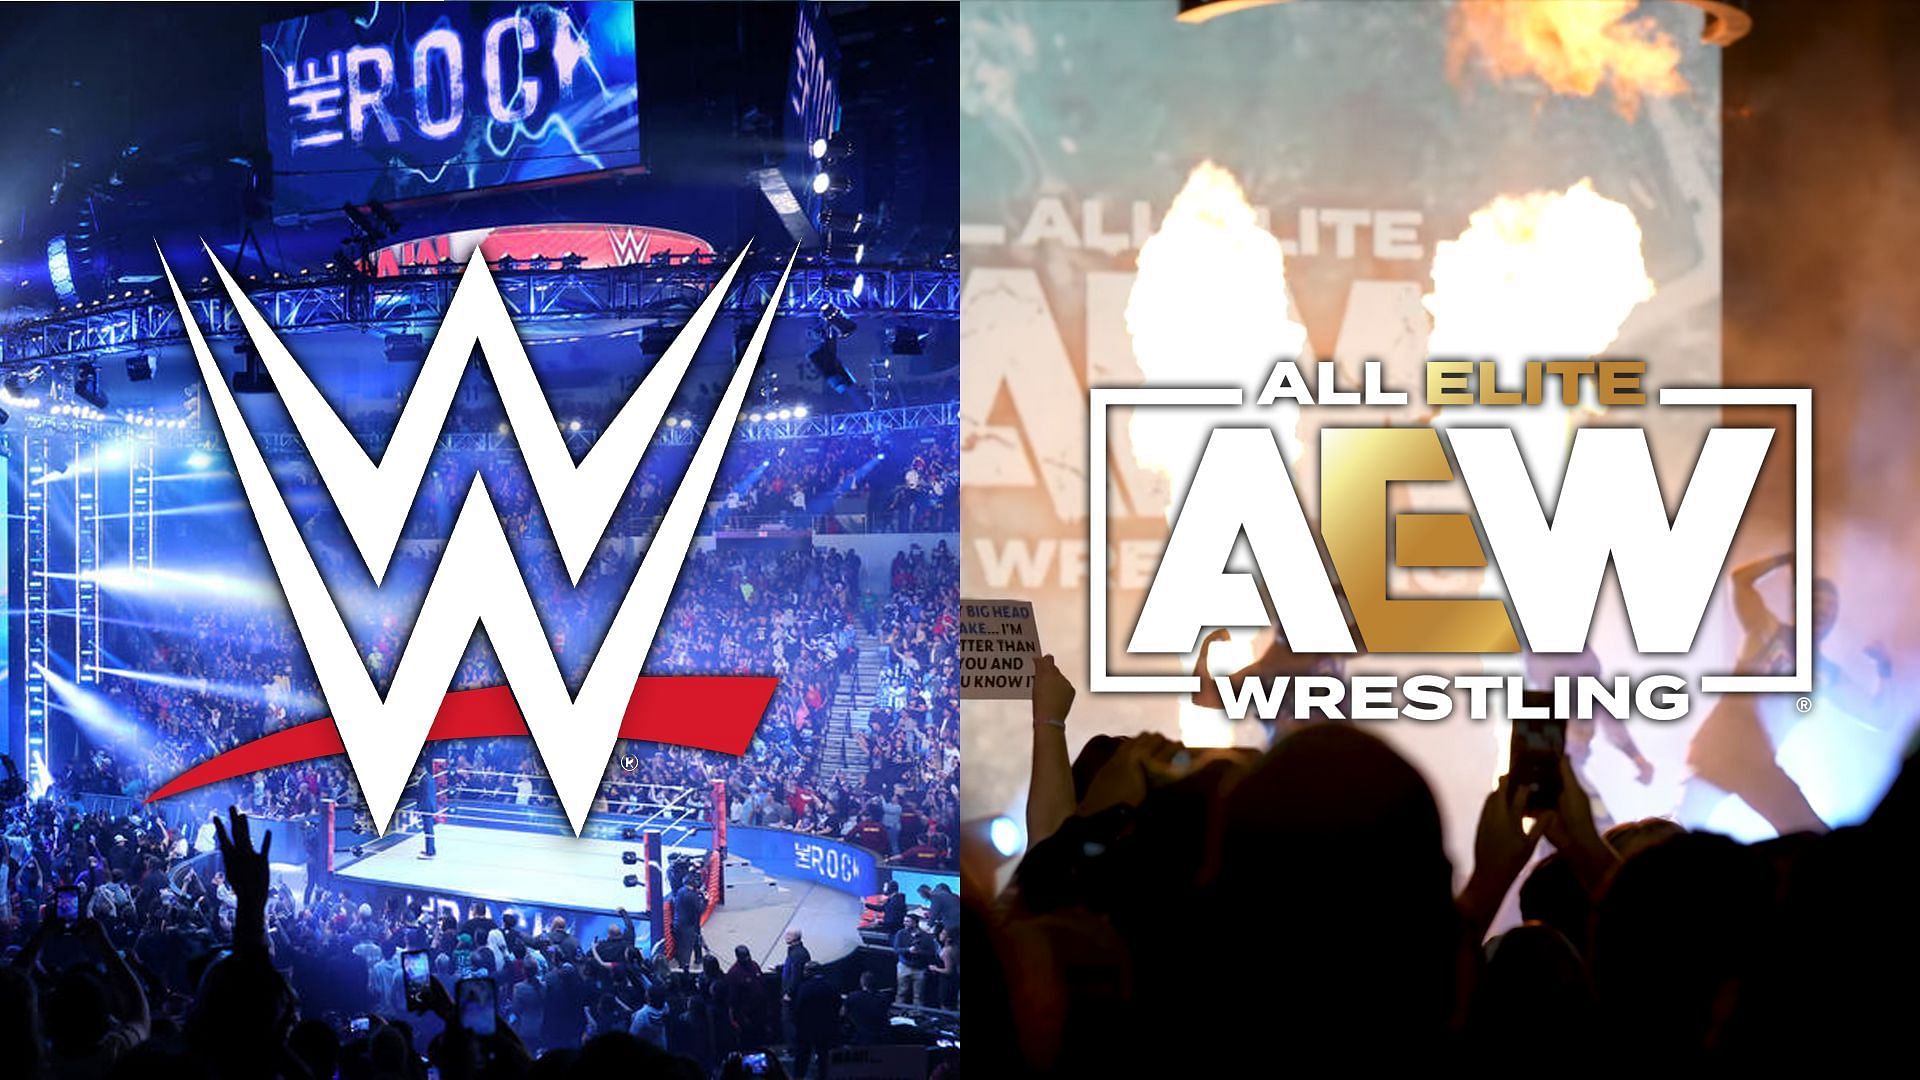 WWE and AEW are North America